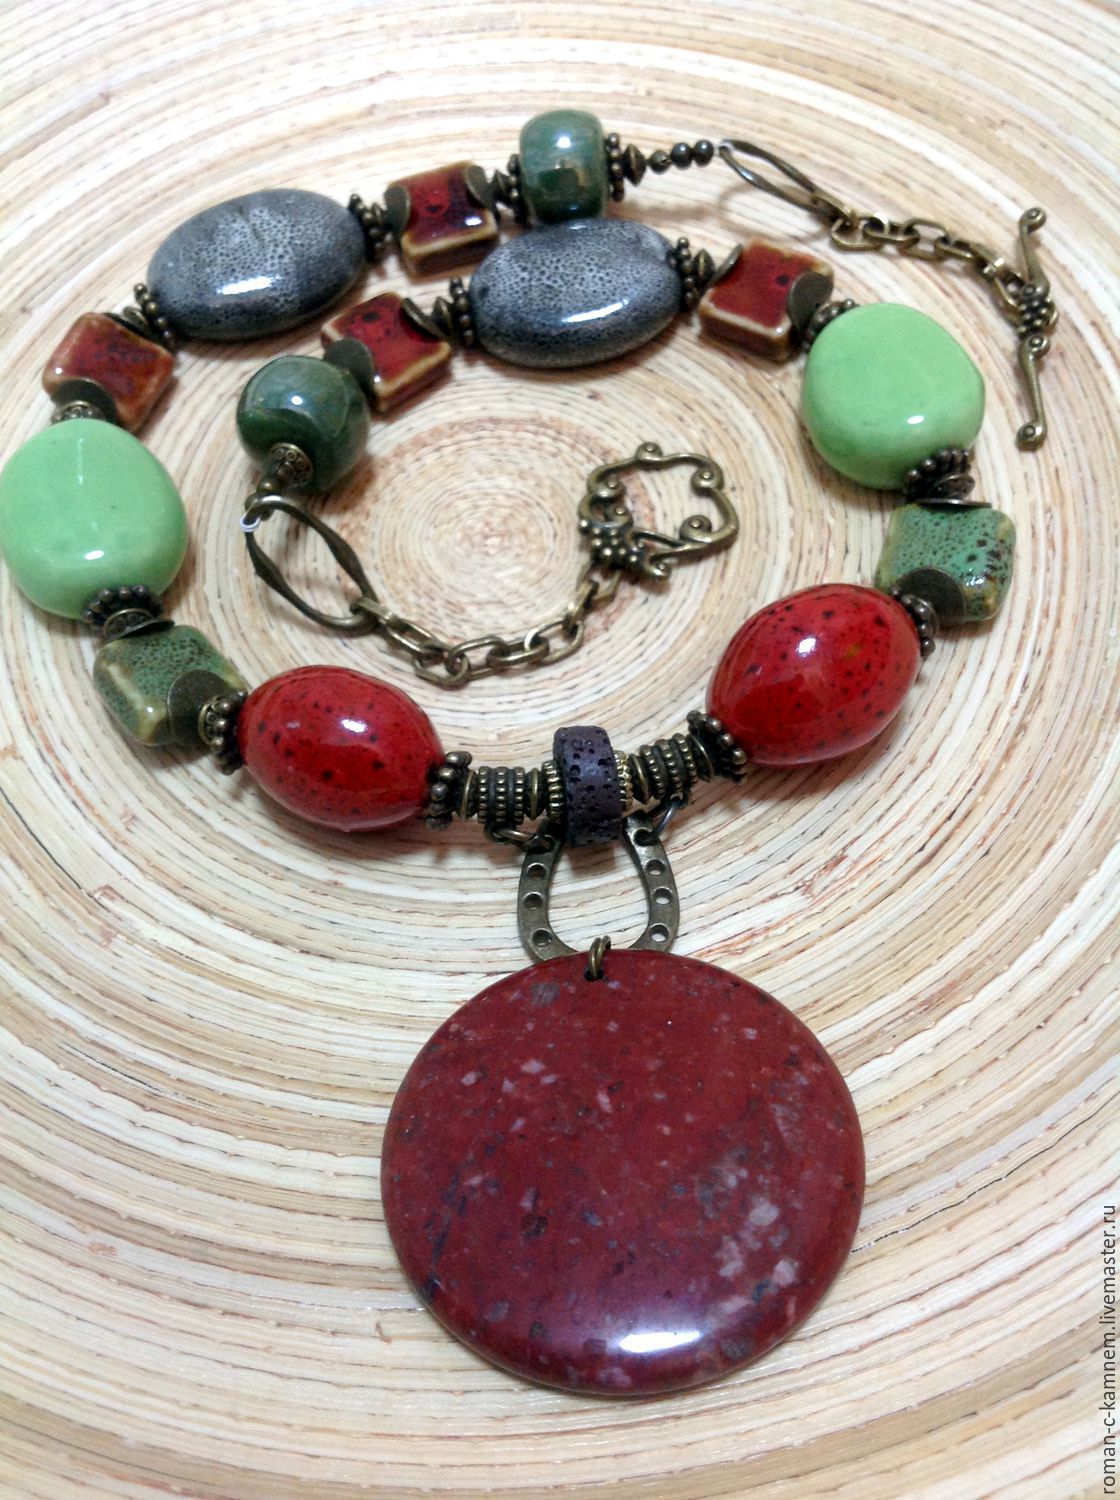 Necklace ceramic in the ethnic style of Gypsy happiness. Beads - a talisman of good luck. Horseshoe for happiness. 
Original gift for the stylish and bold women and girls.